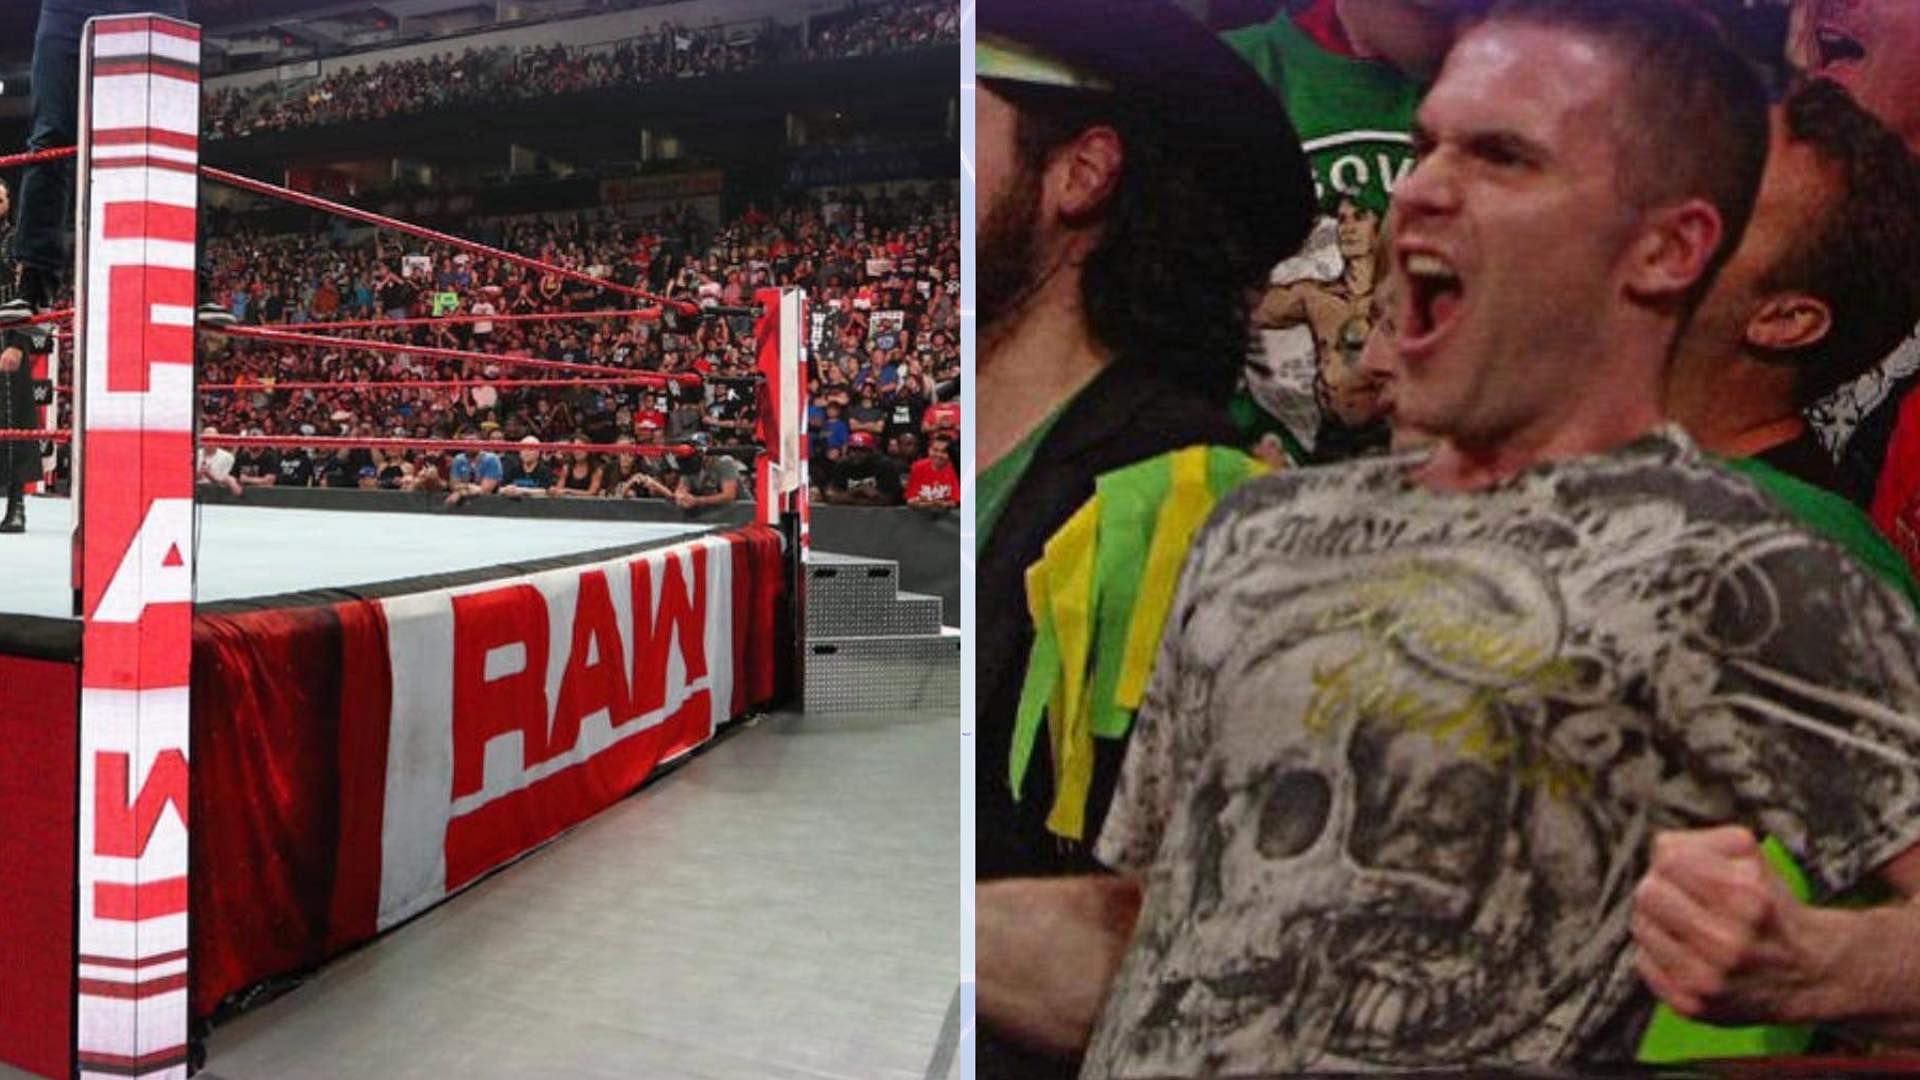 WWE RAW this week was live from the 